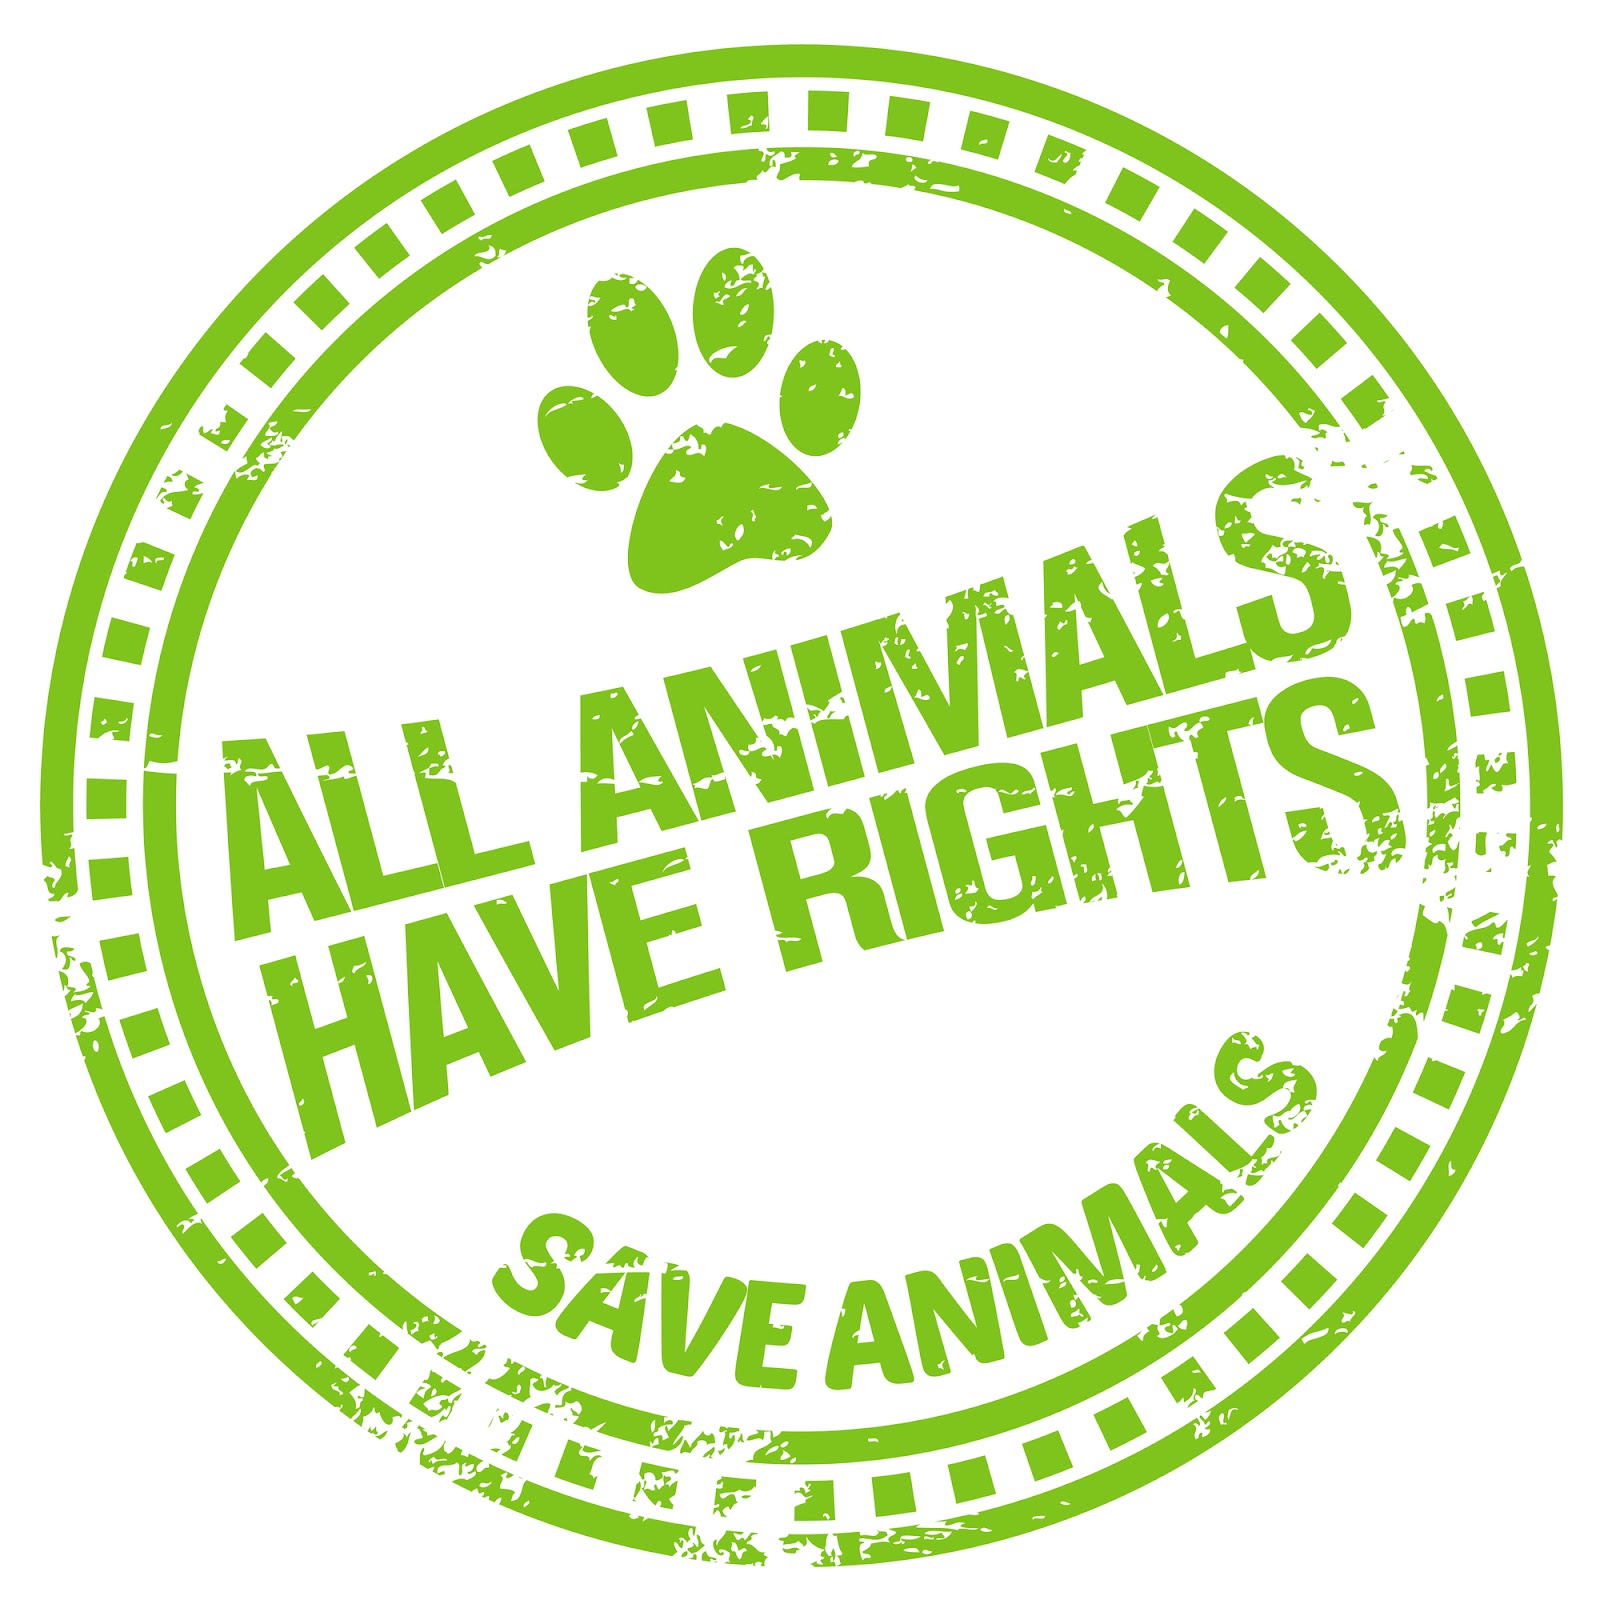 introduction of animal rights essay